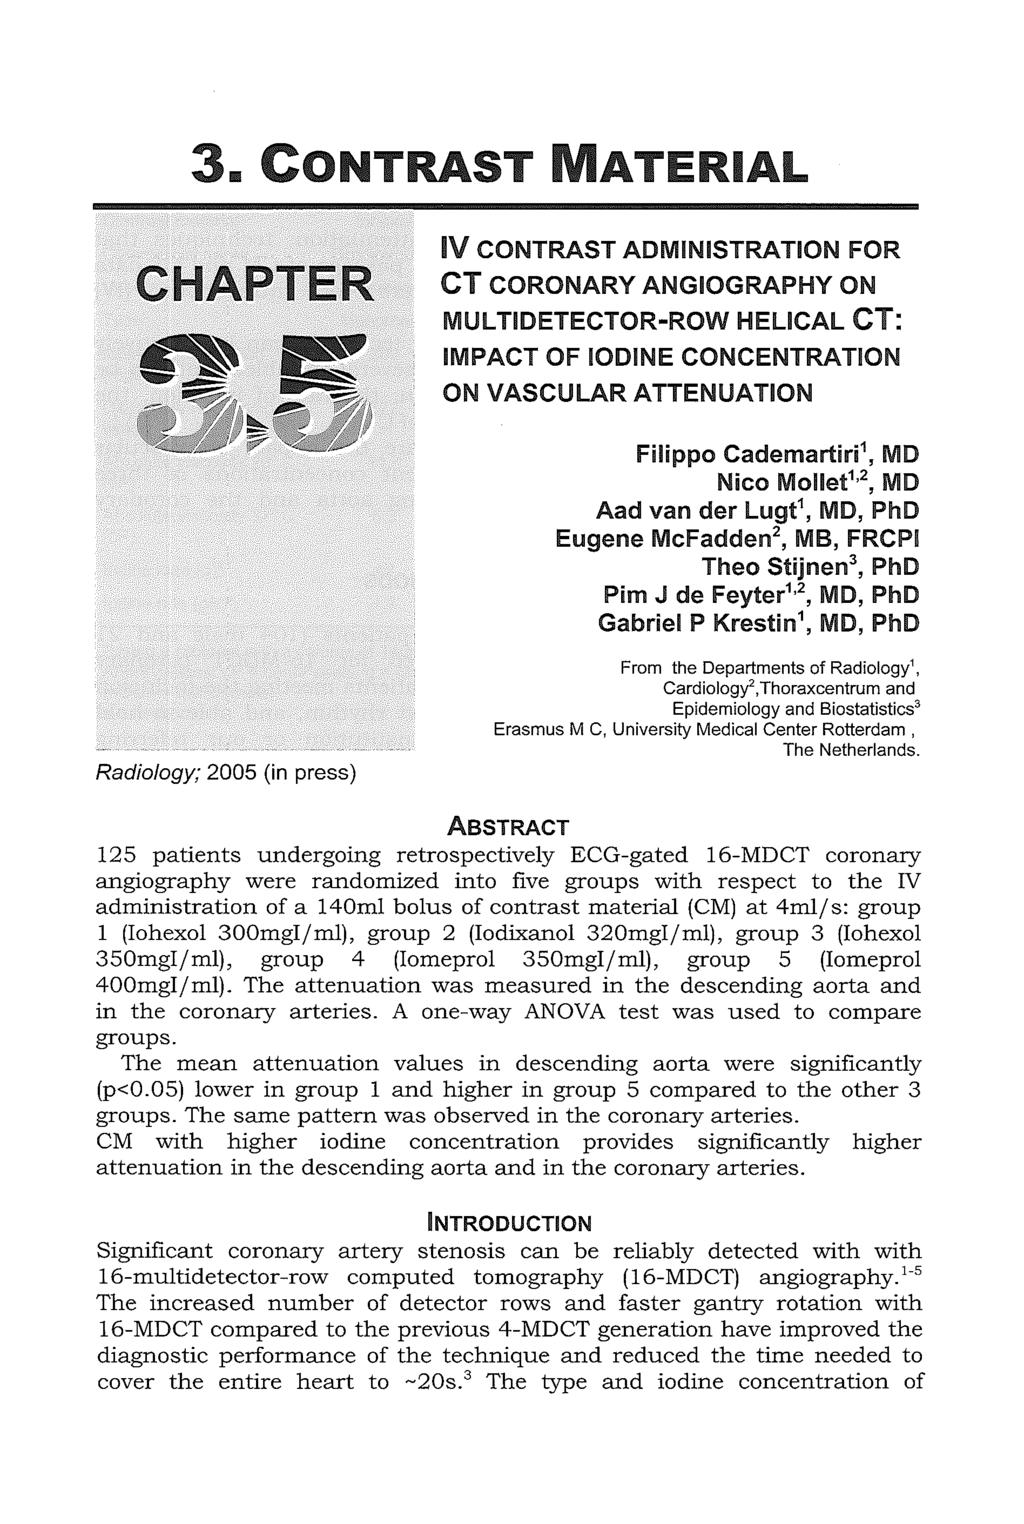 3. CONTRAST ATE RIAL CHAPTER IV CONTRAST ADMINISTRATION FOR CT CORONARY ANGIOGRAPHY ON MUL TIDETECTOR ROW HELICAL CT: IMPACT OF IODINE CONCENTRATION ON VASCULAR ATTENUATION Filippo Cademartiri 1, MD